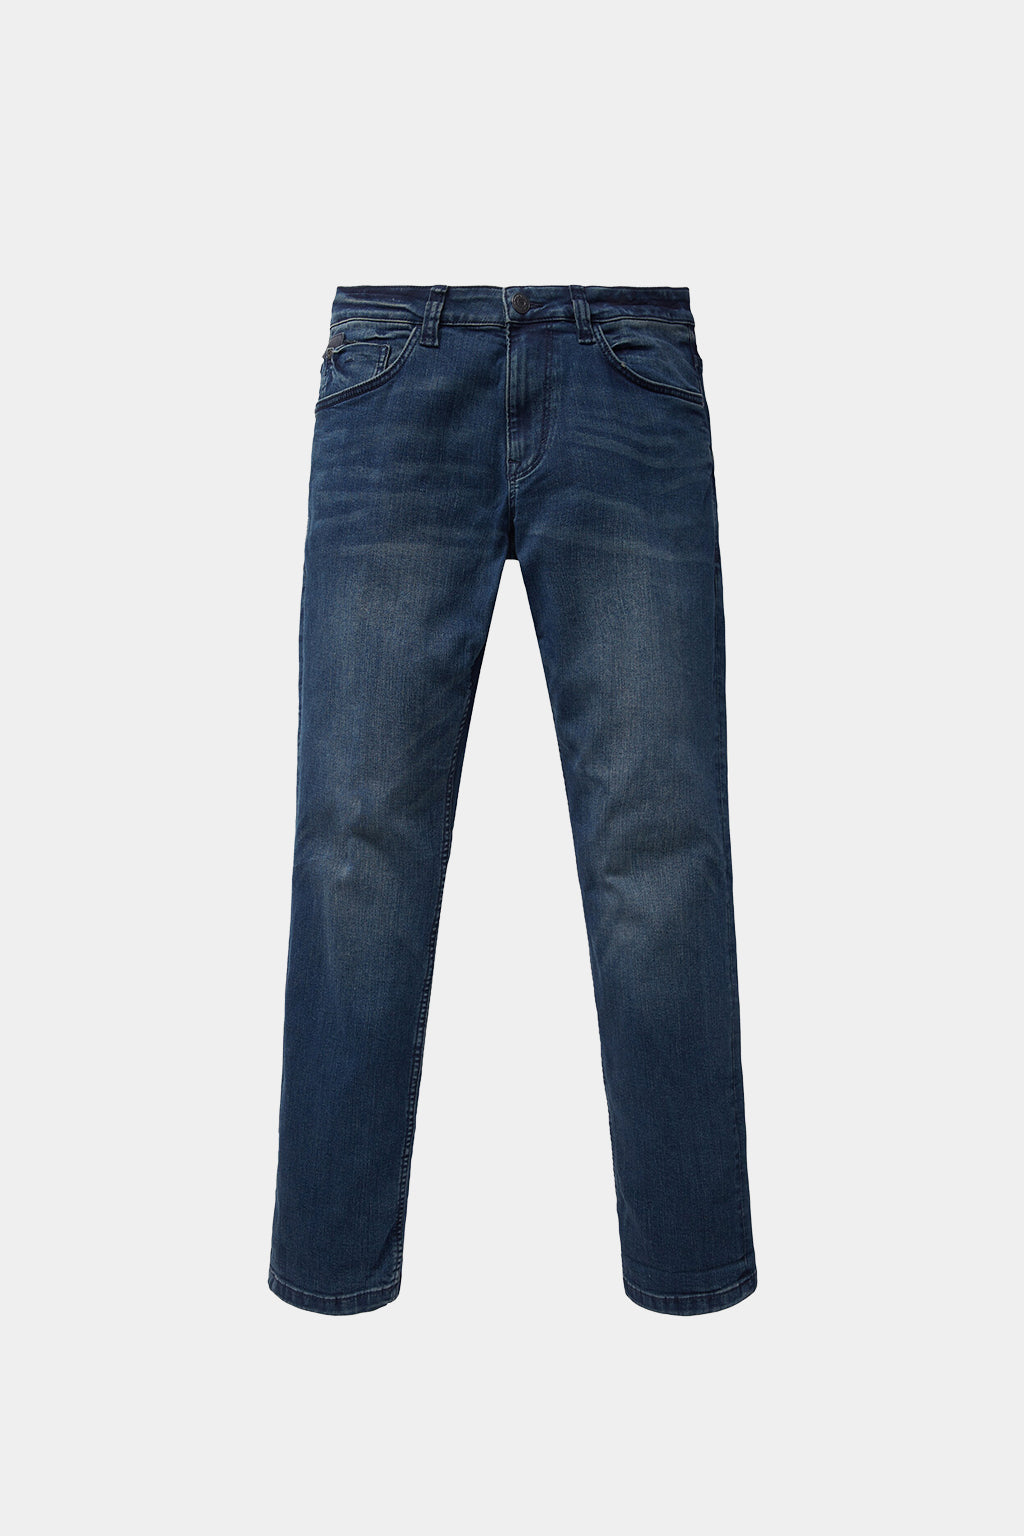 Tom Tailor - Marvin Straight Jeans